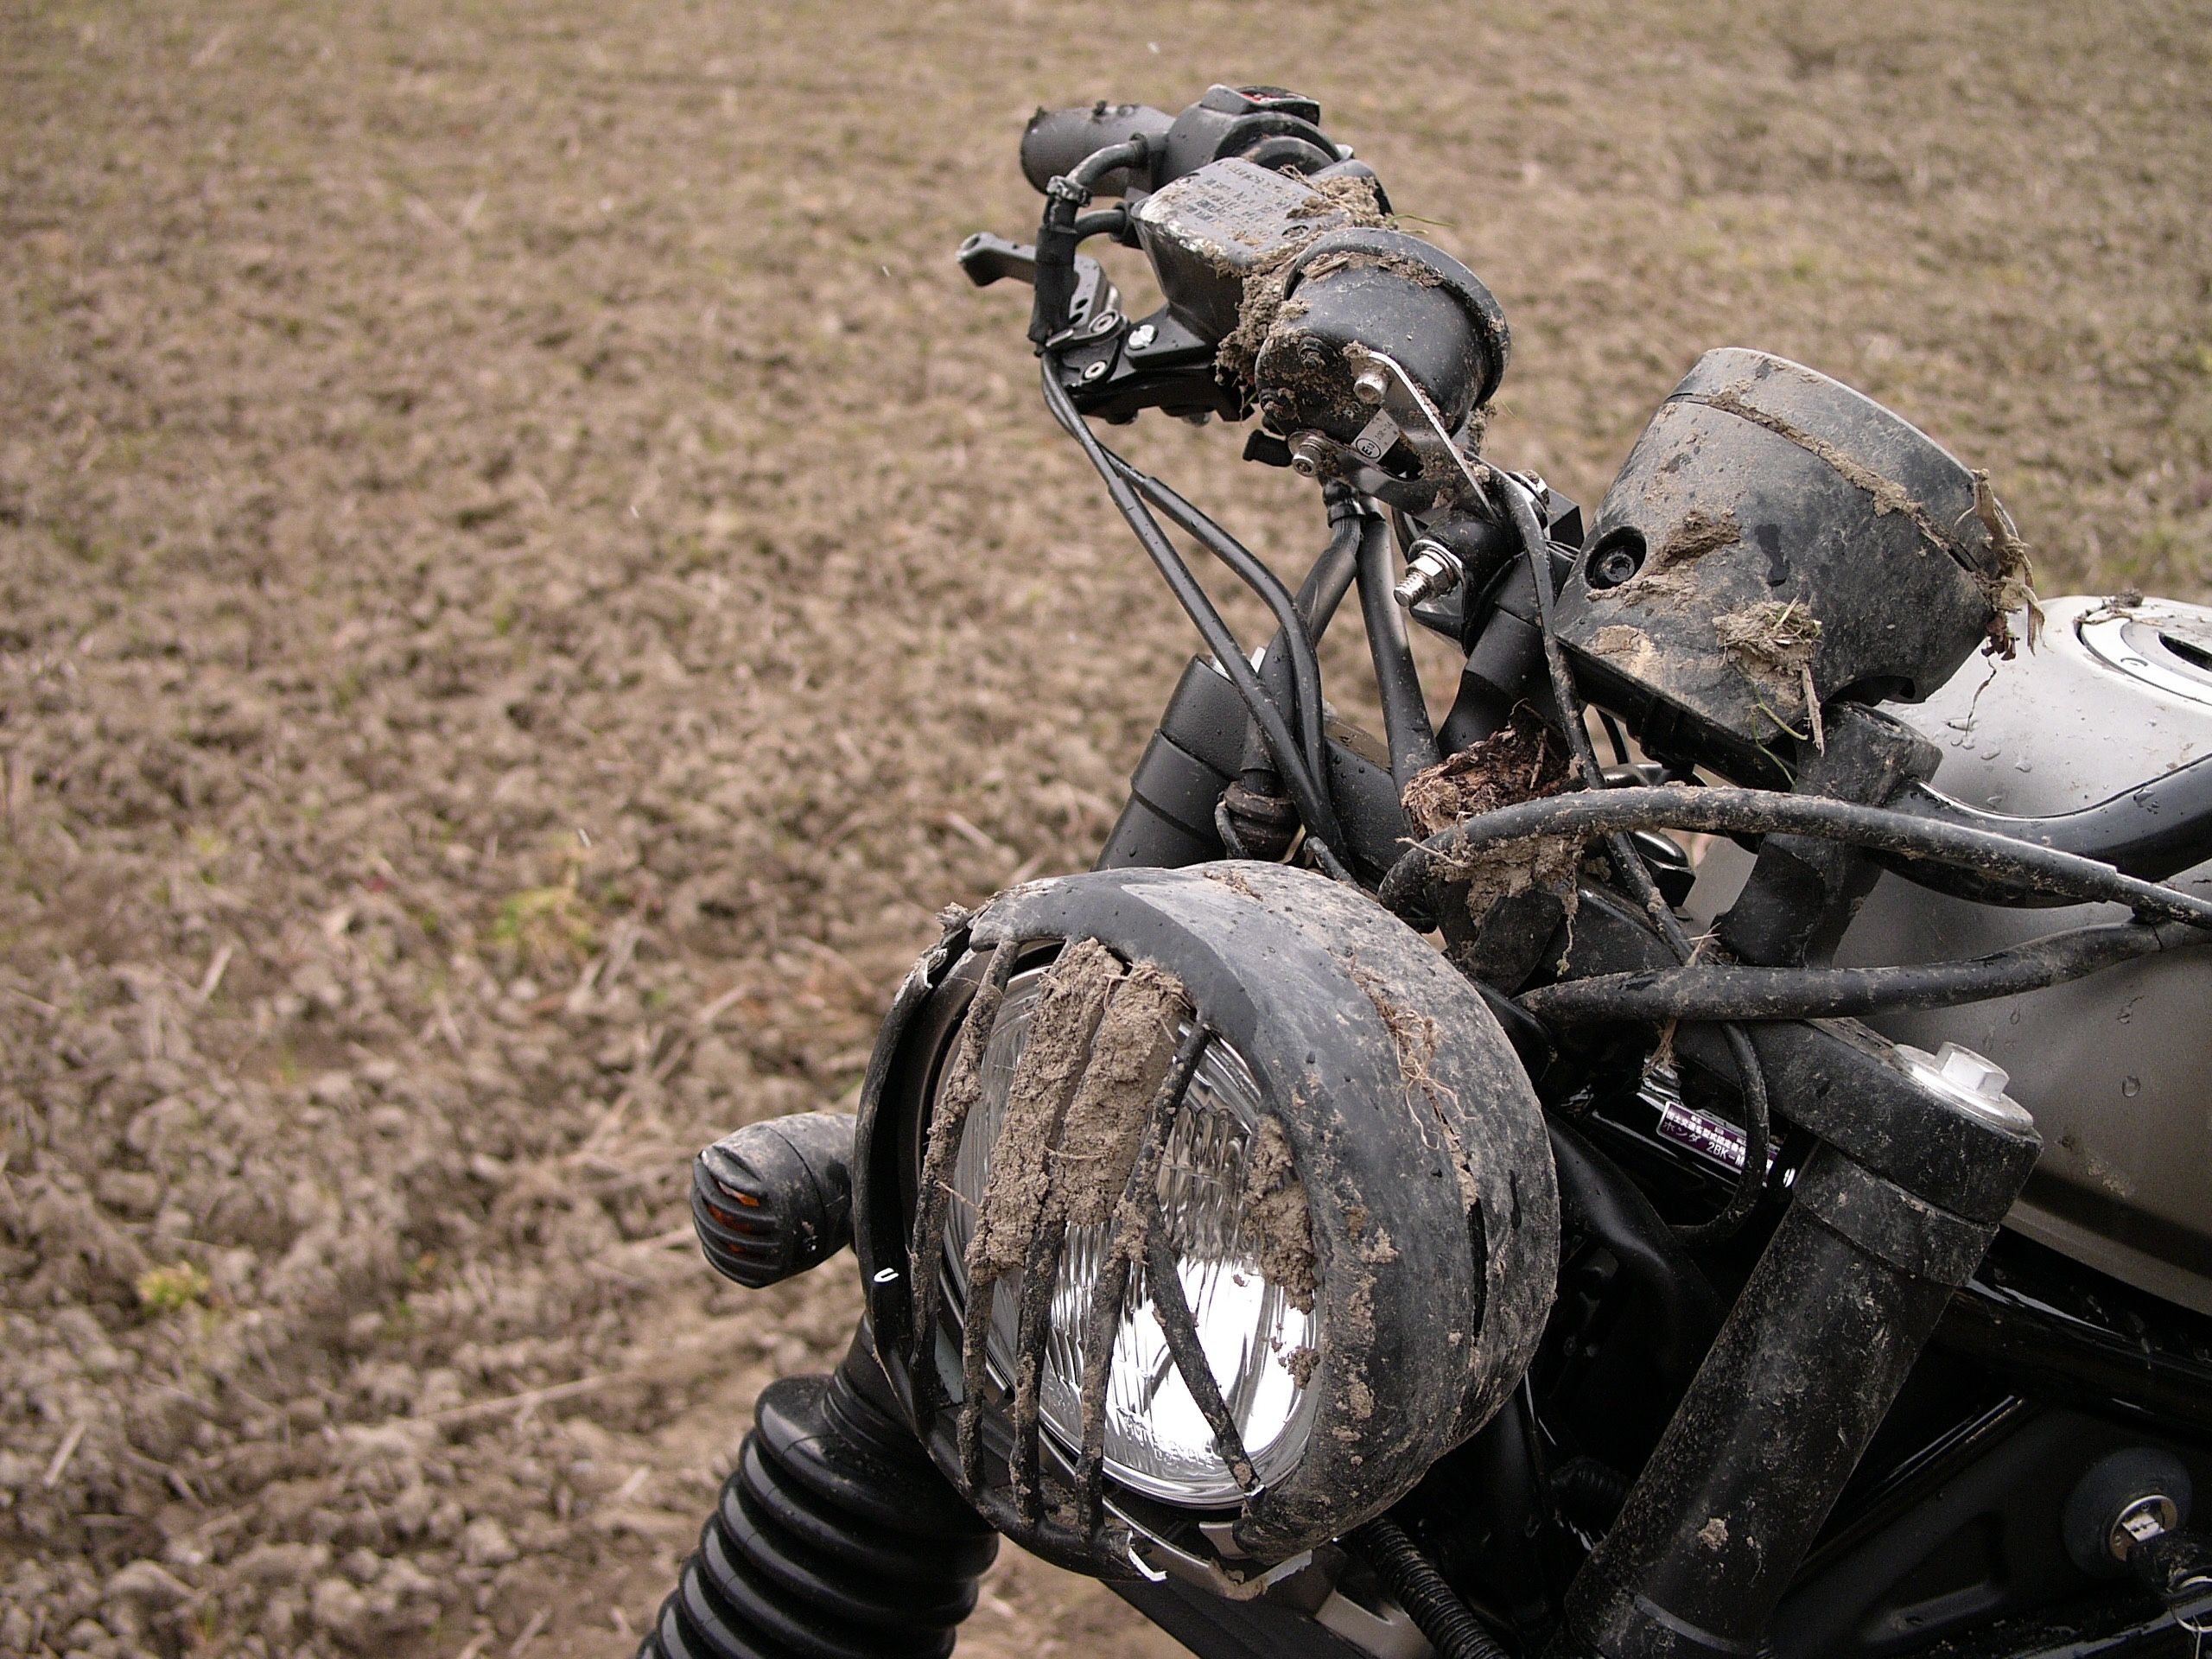 A muddy motorcycle stands in a field.